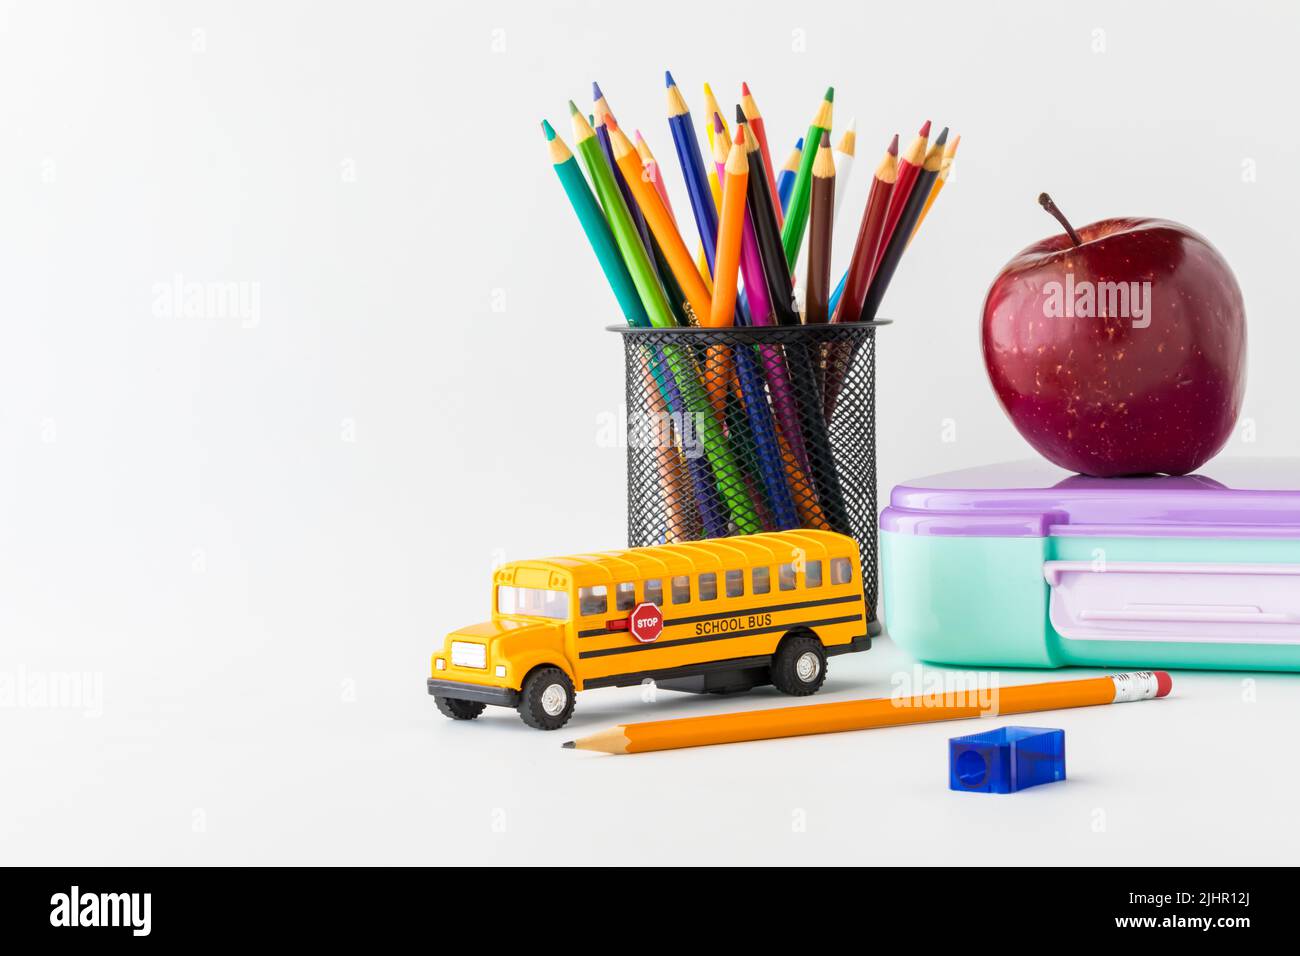 Back to school supplies including pencil crayons, lunchbox and apple. Stock Photo